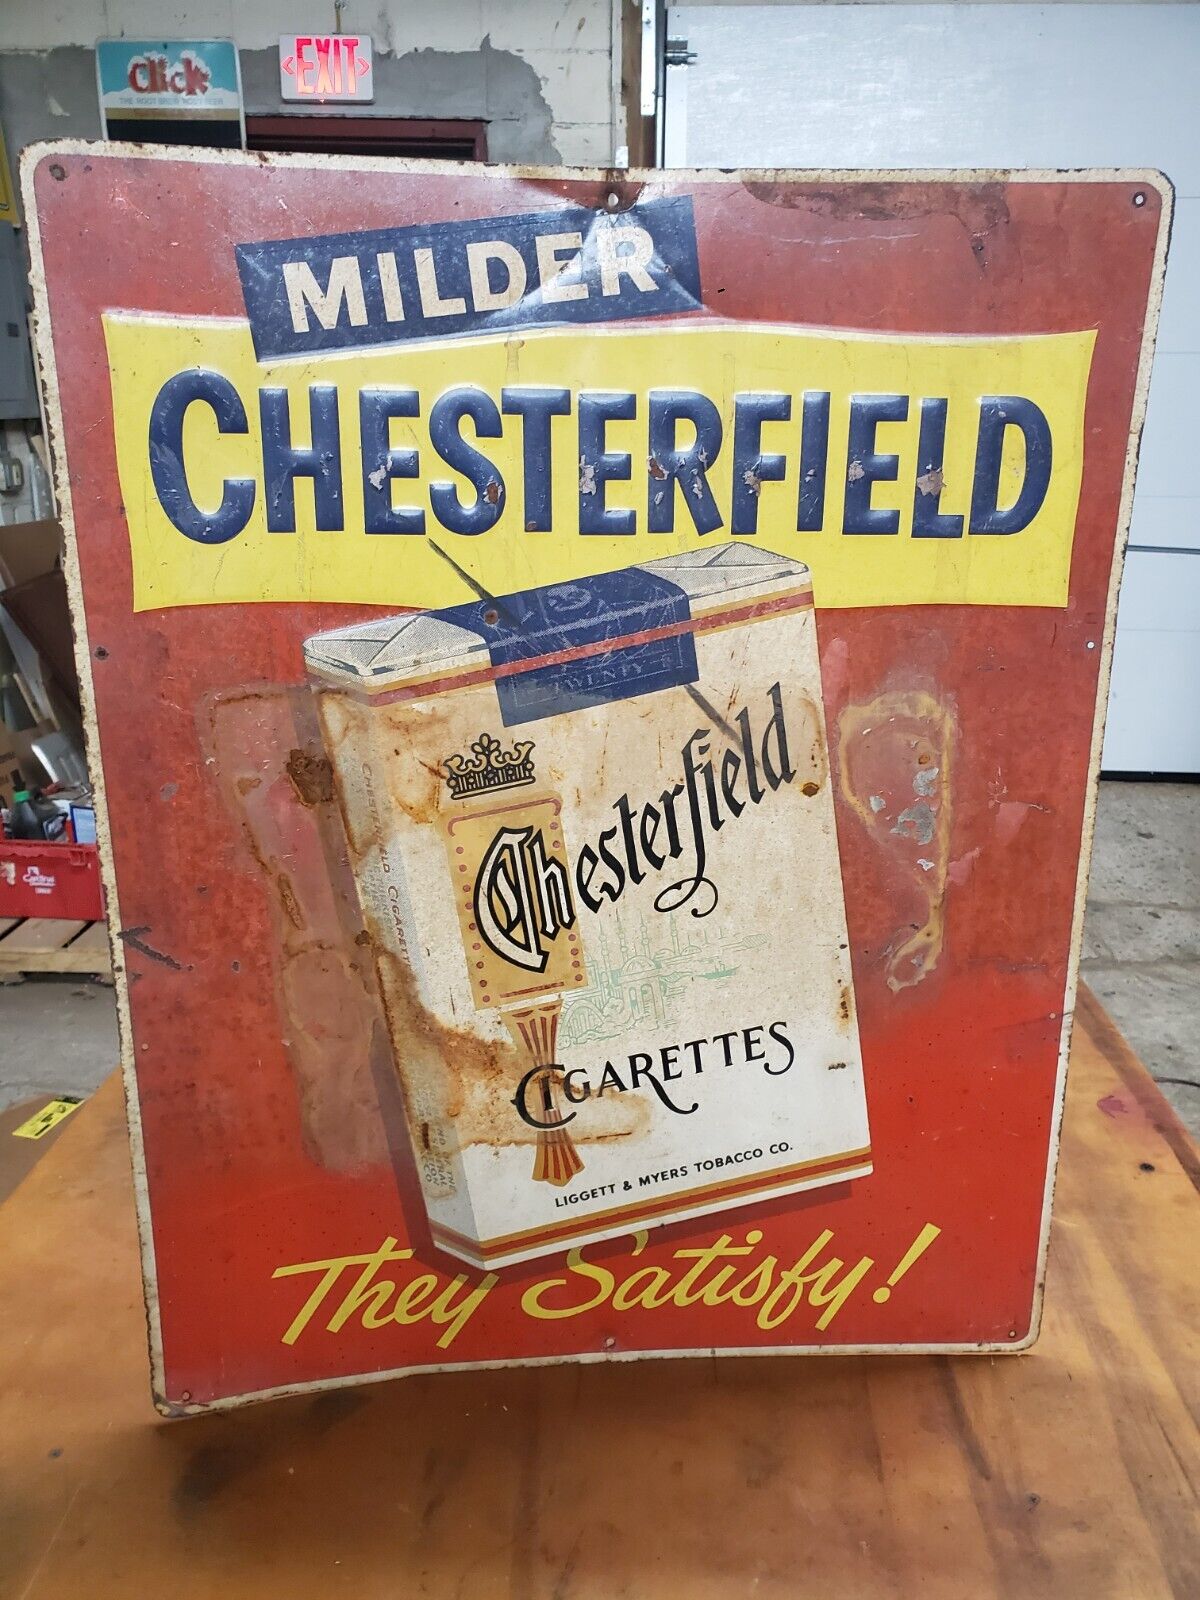 Chesterfield Cigerette Sign Metal Advertisment  Liggett & Myers Tobacco co.